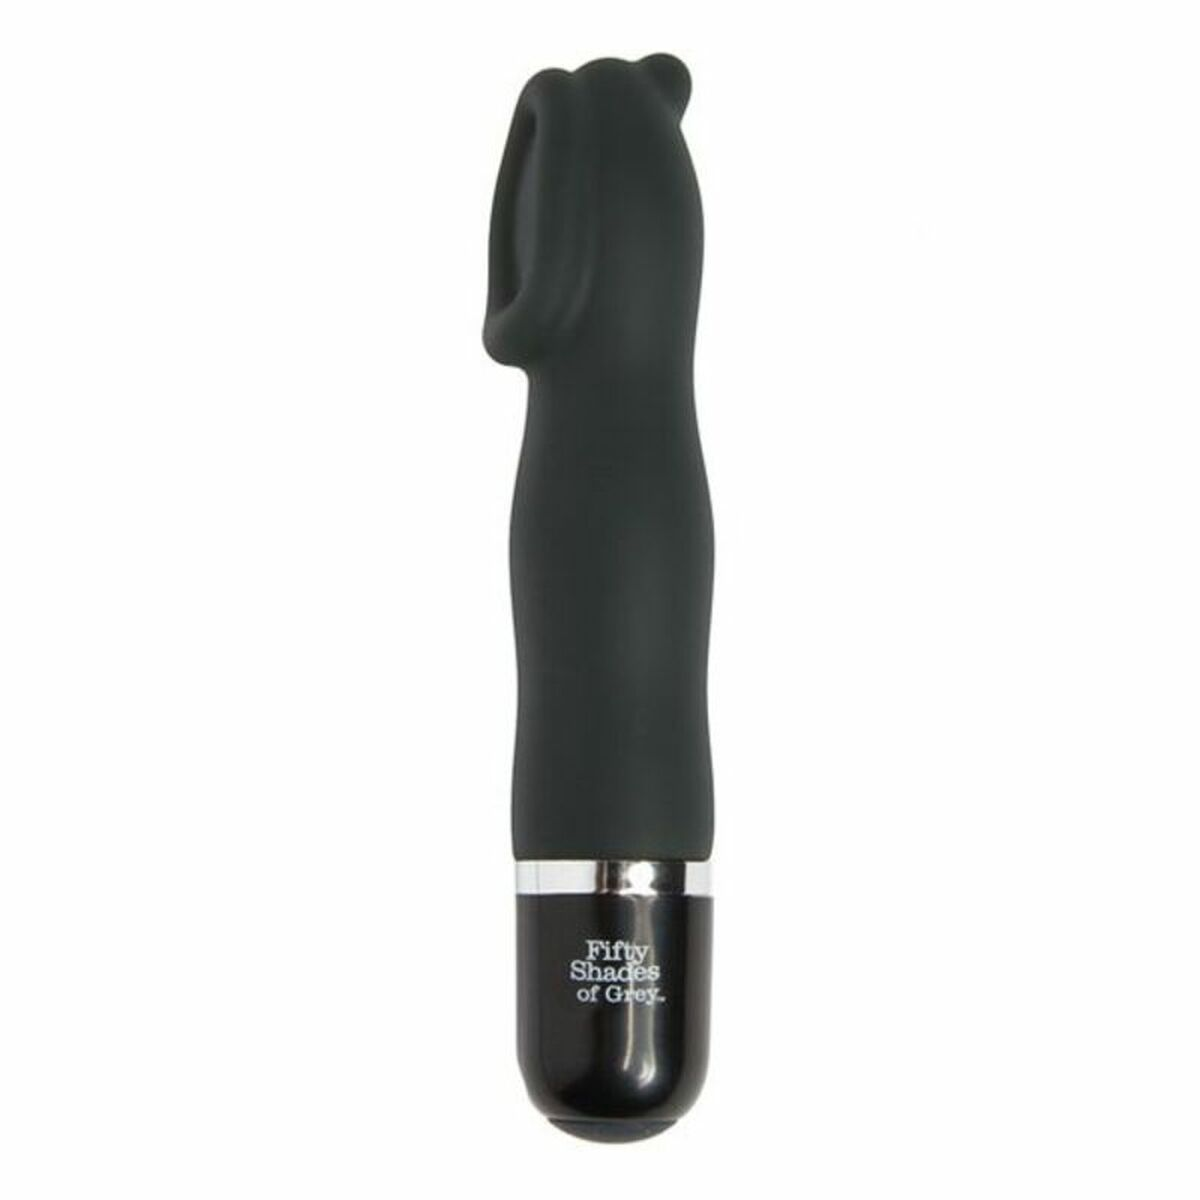 SHADES OF Touch Vibrator Sweet GREY FIFTY